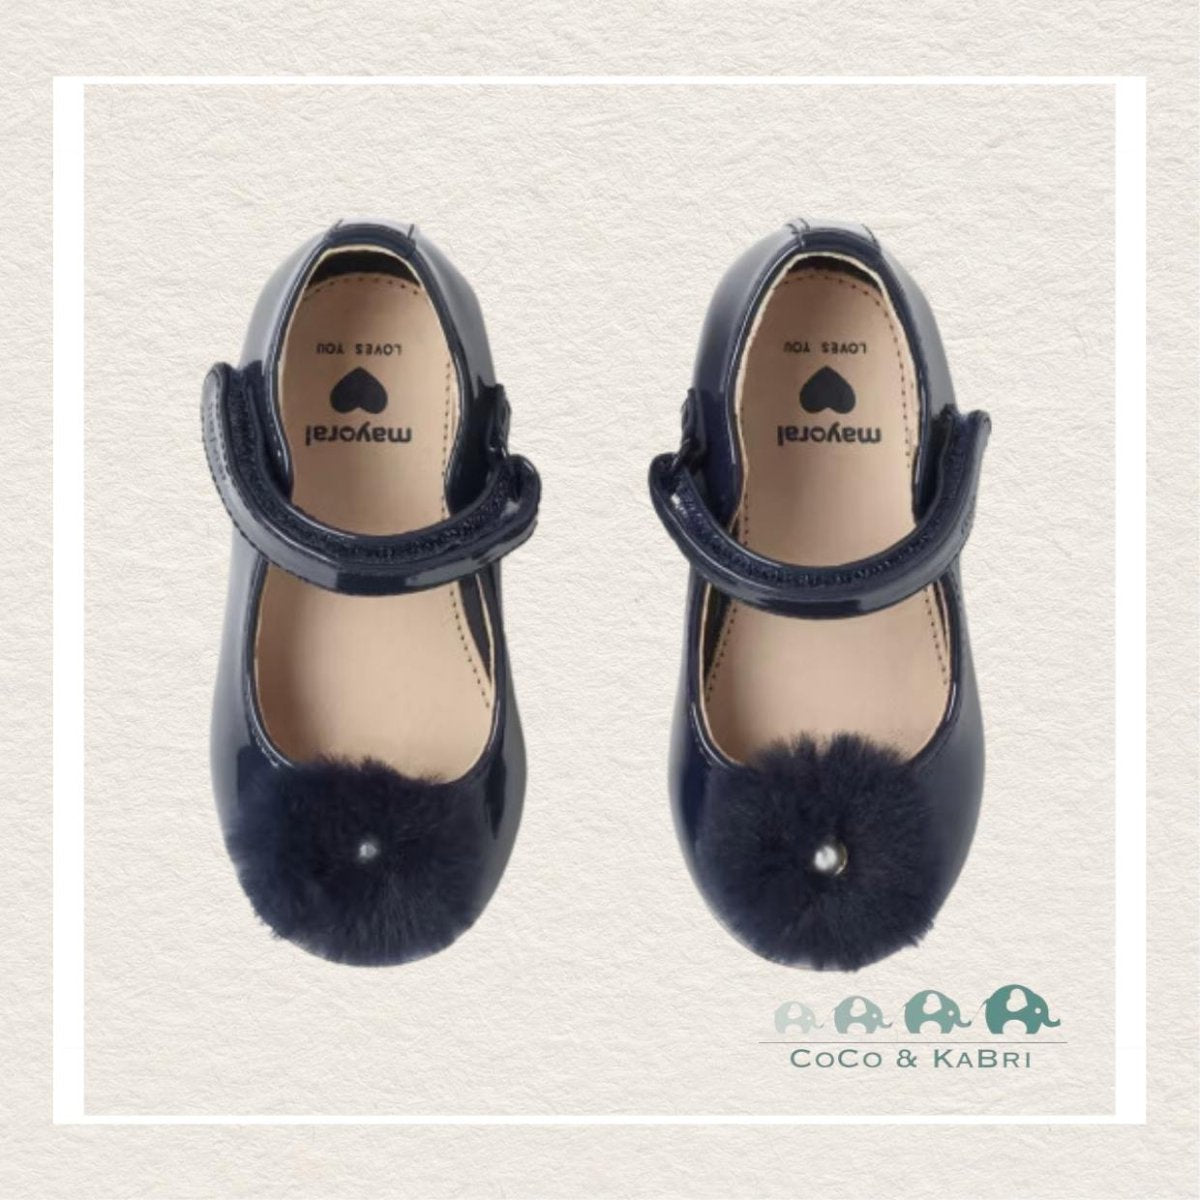 Mayoral: Pom pom mary janes sustainable leather baby - Navy (M1-16), CoCo & KaBri Children's Boutique